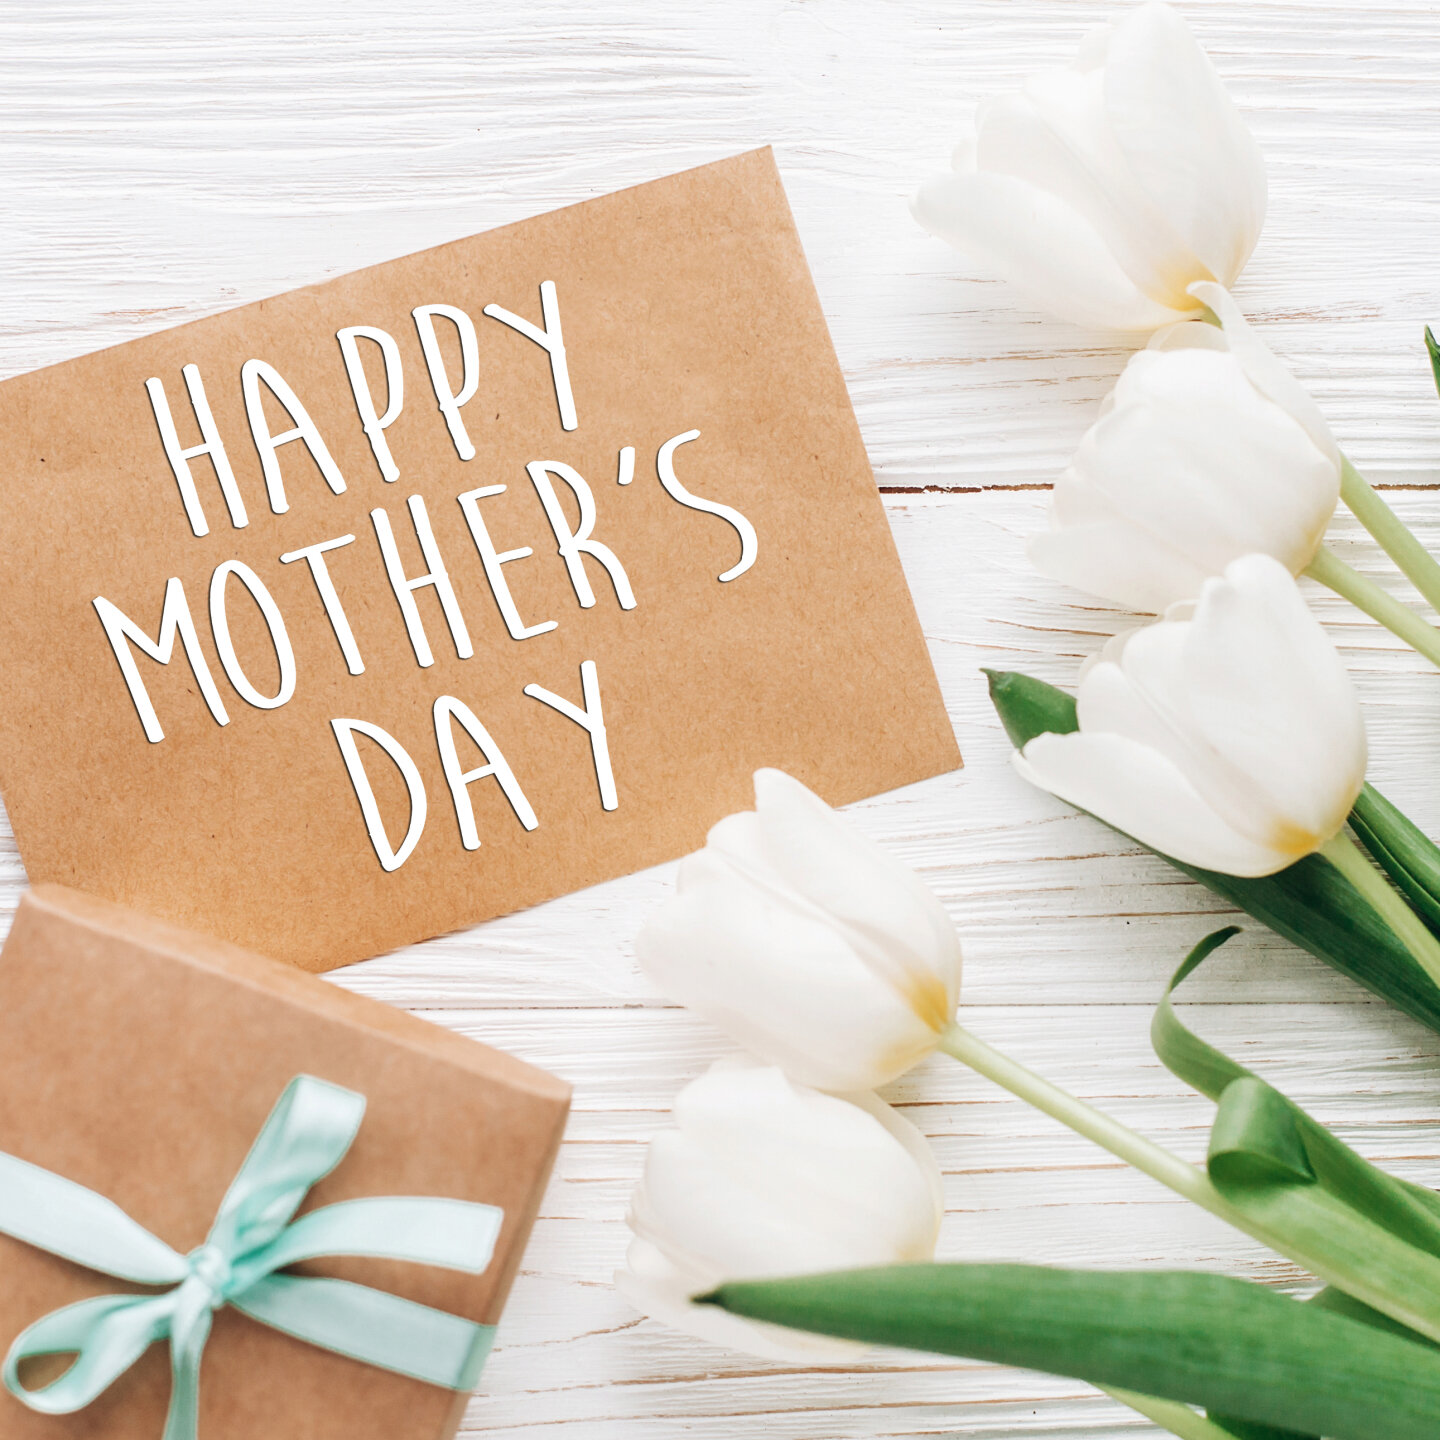 Happy Mother's Day to all who are, and those you have cherished, from the team at Embellish Designs.